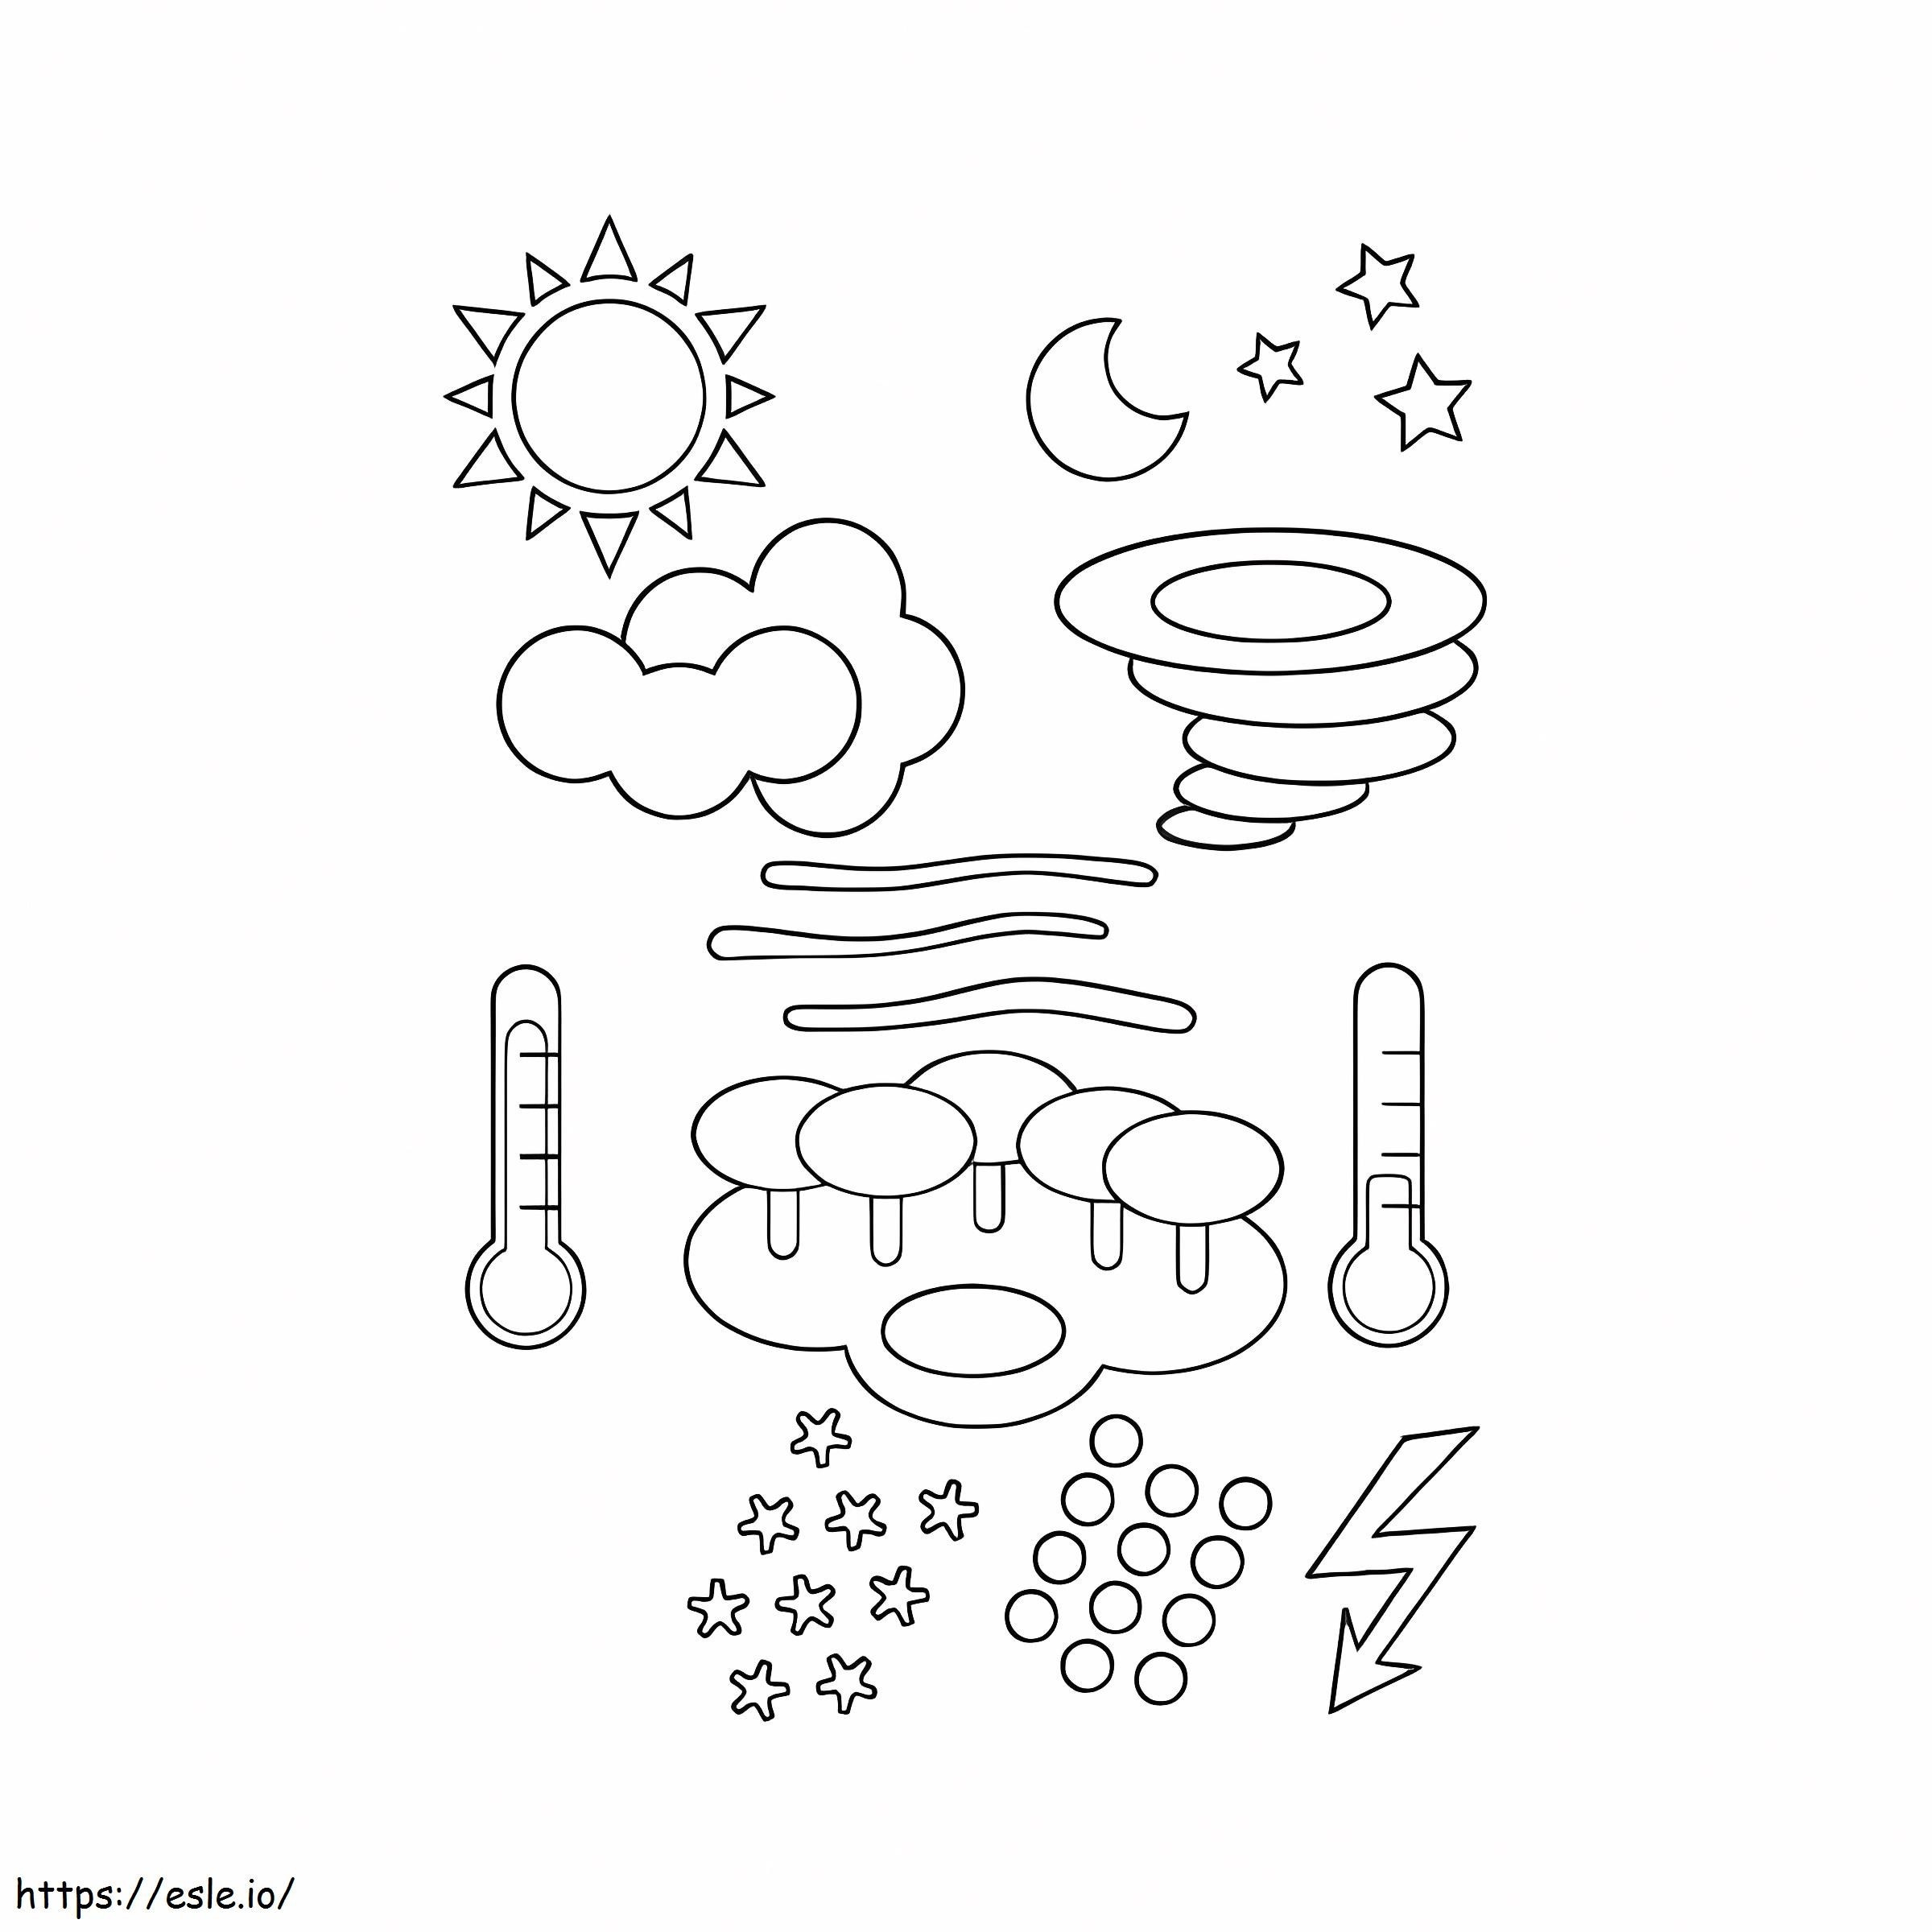 Weather Symbols coloring page